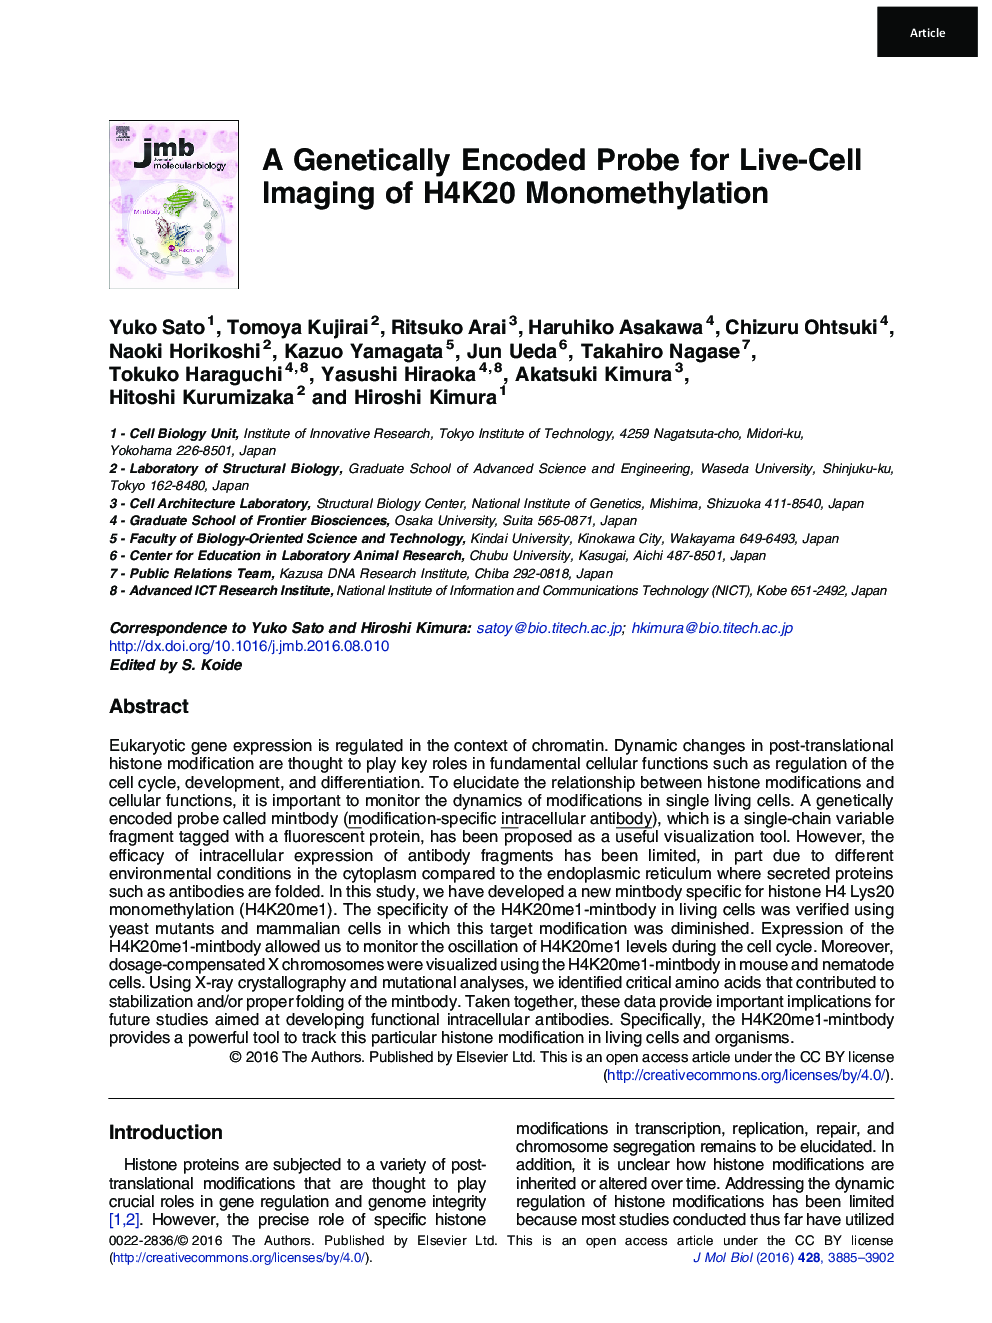 A Genetically Encoded Probe for Live-Cell Imaging of H4K20 Monomethylation